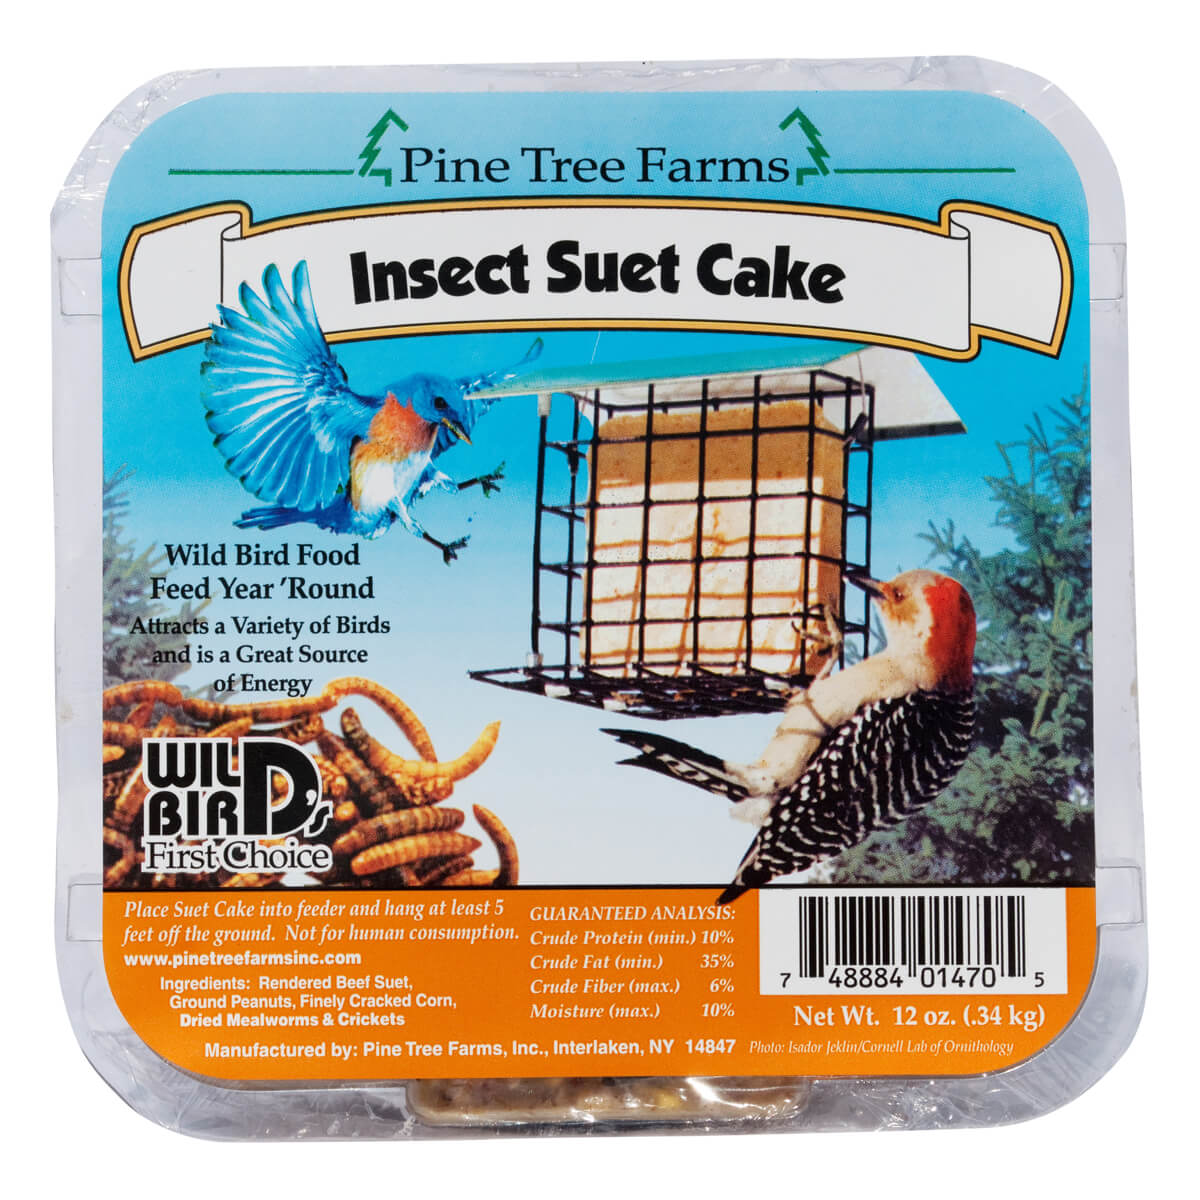 Pine Tree Farms Insect Suet Cakes